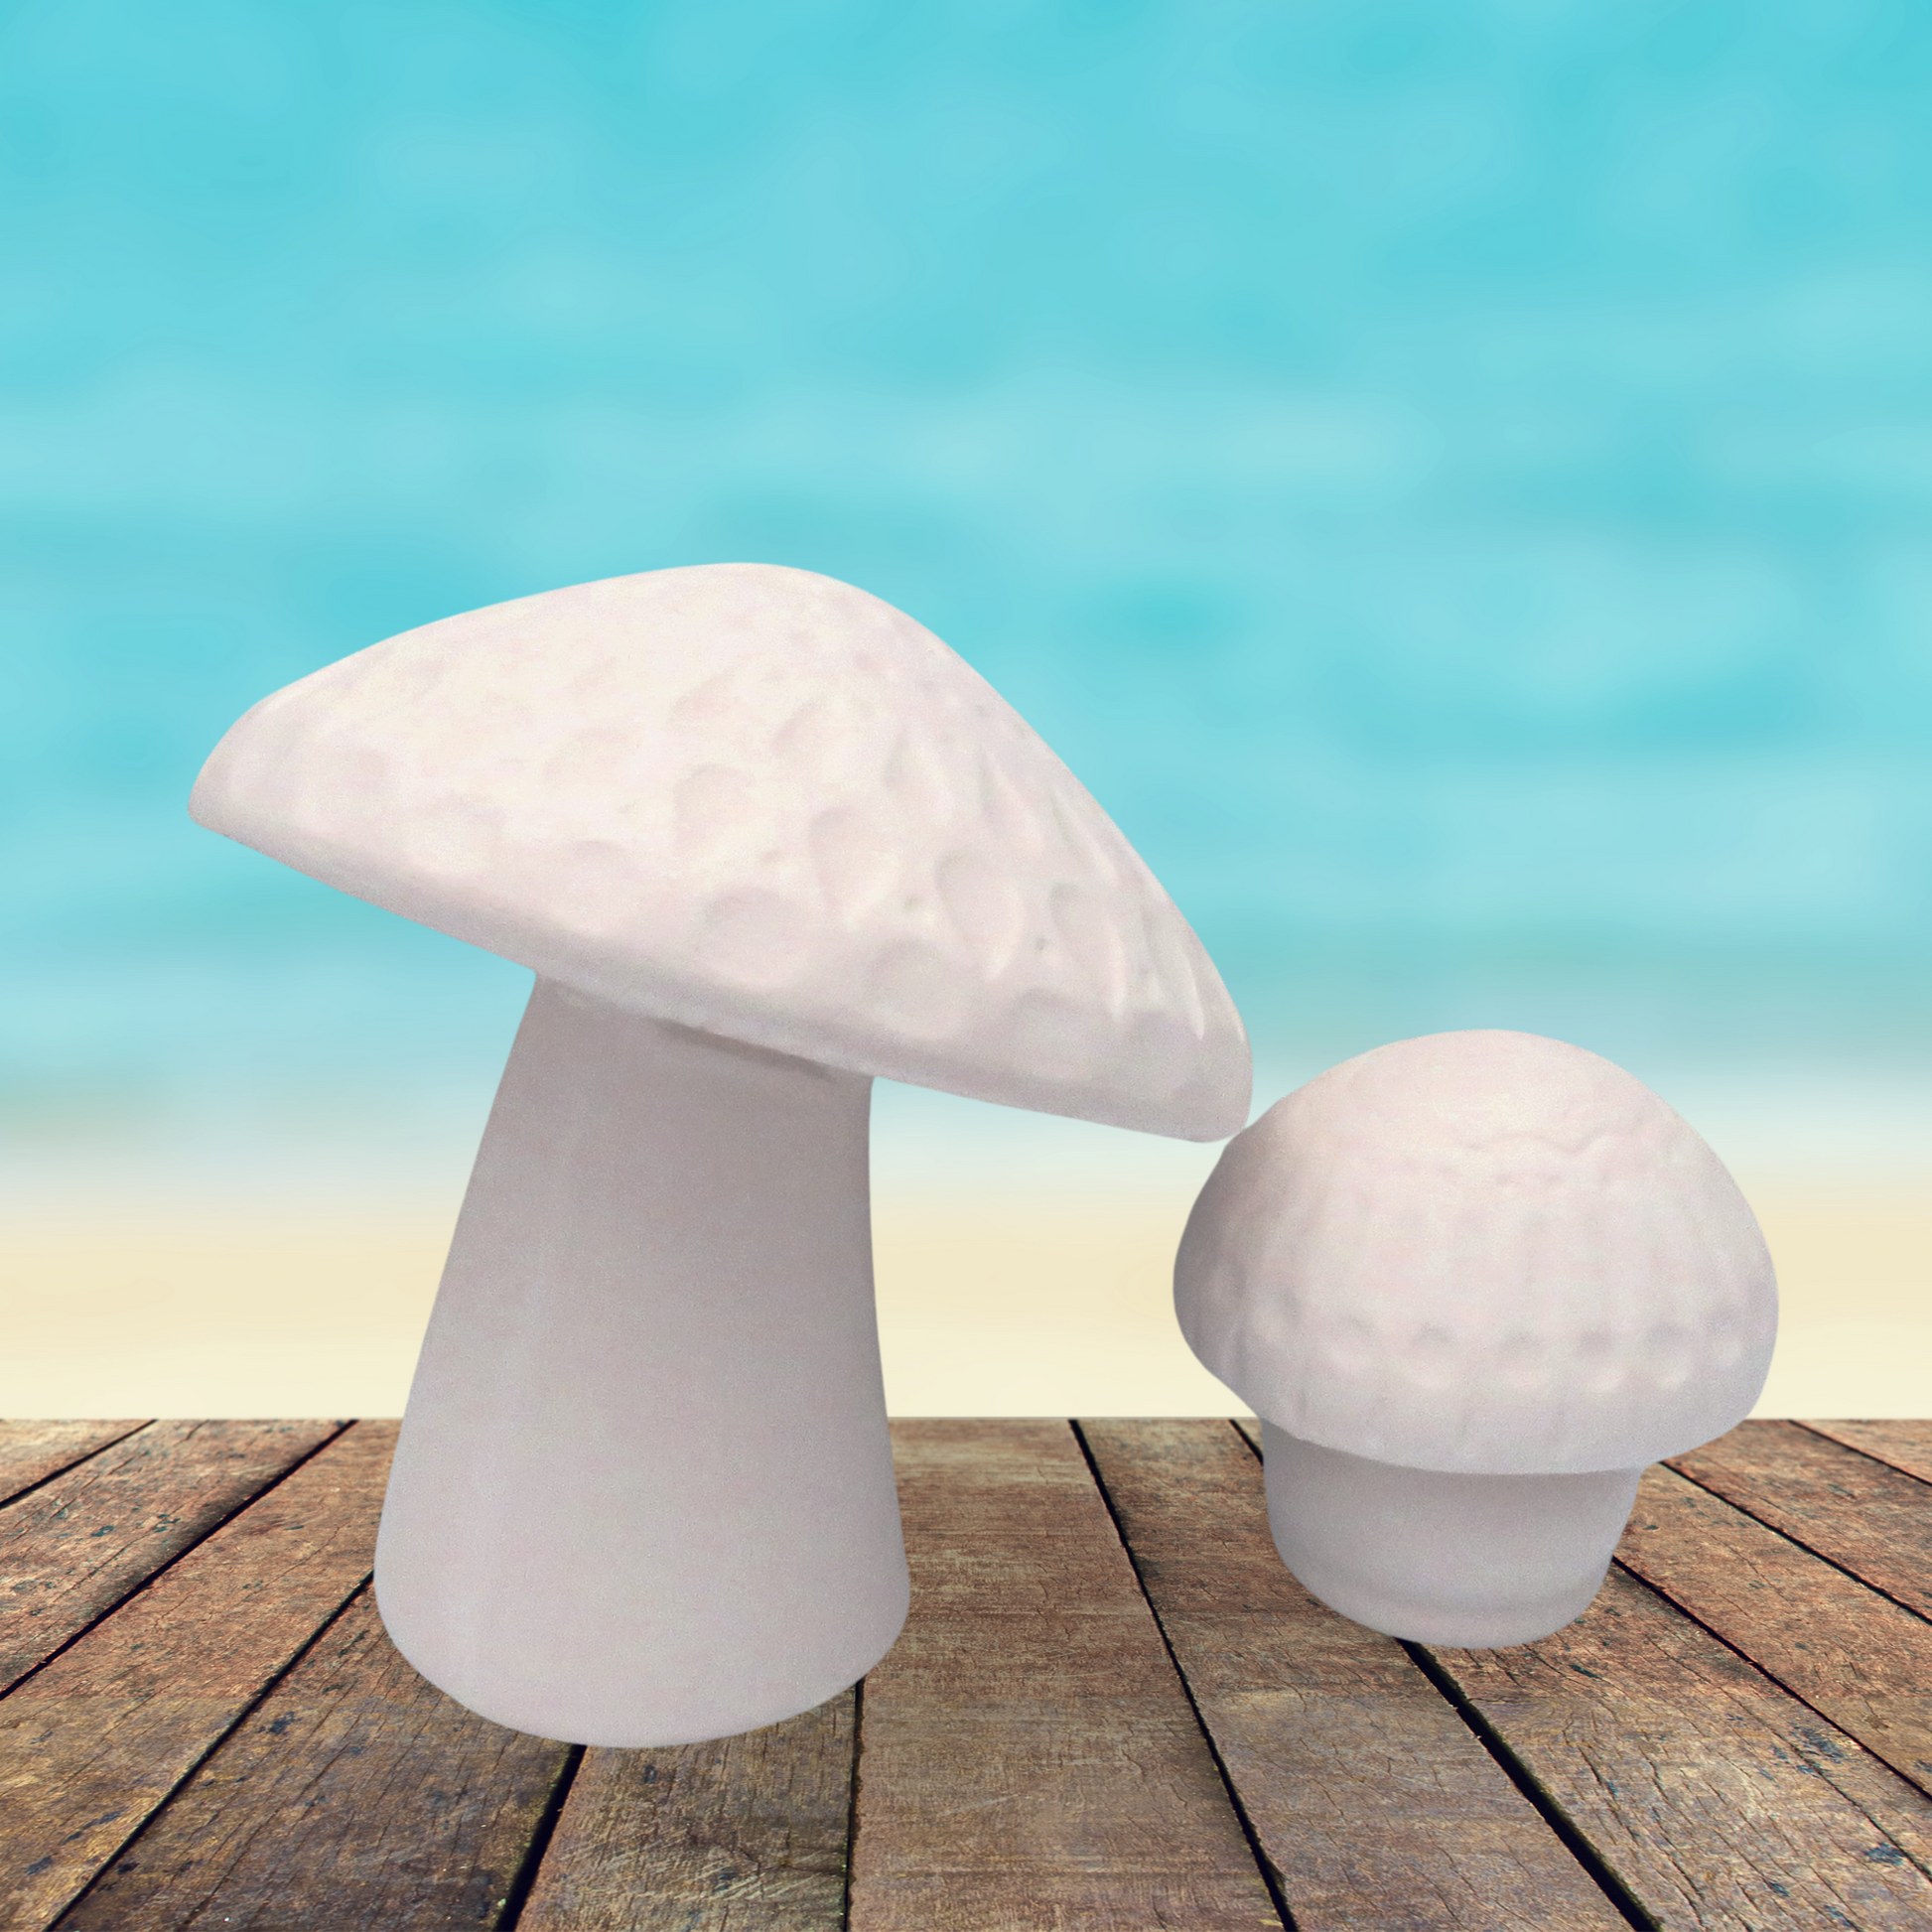 Set of 2 handmade ready to paint ceramic mushrooms figurines on a rustic wood table by the ocean.